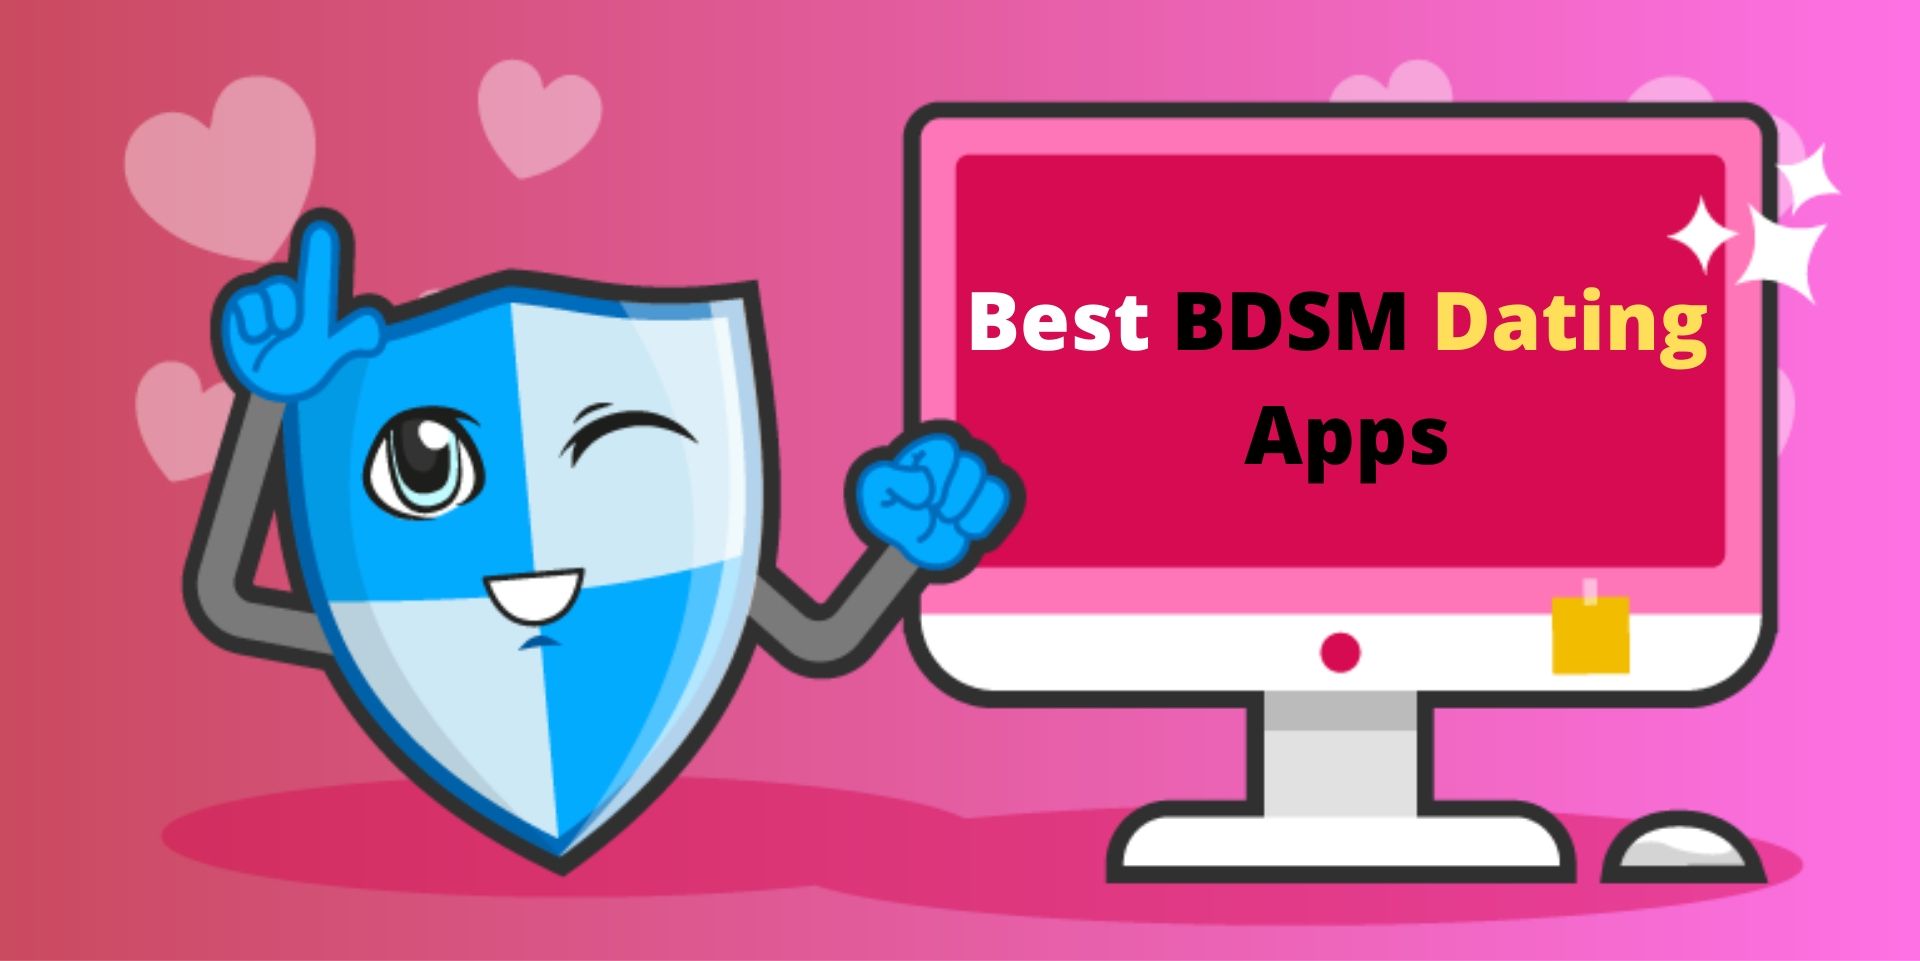 Top 10 BDSM Dating Sites & Apps for Masters, Mistresses in 2020